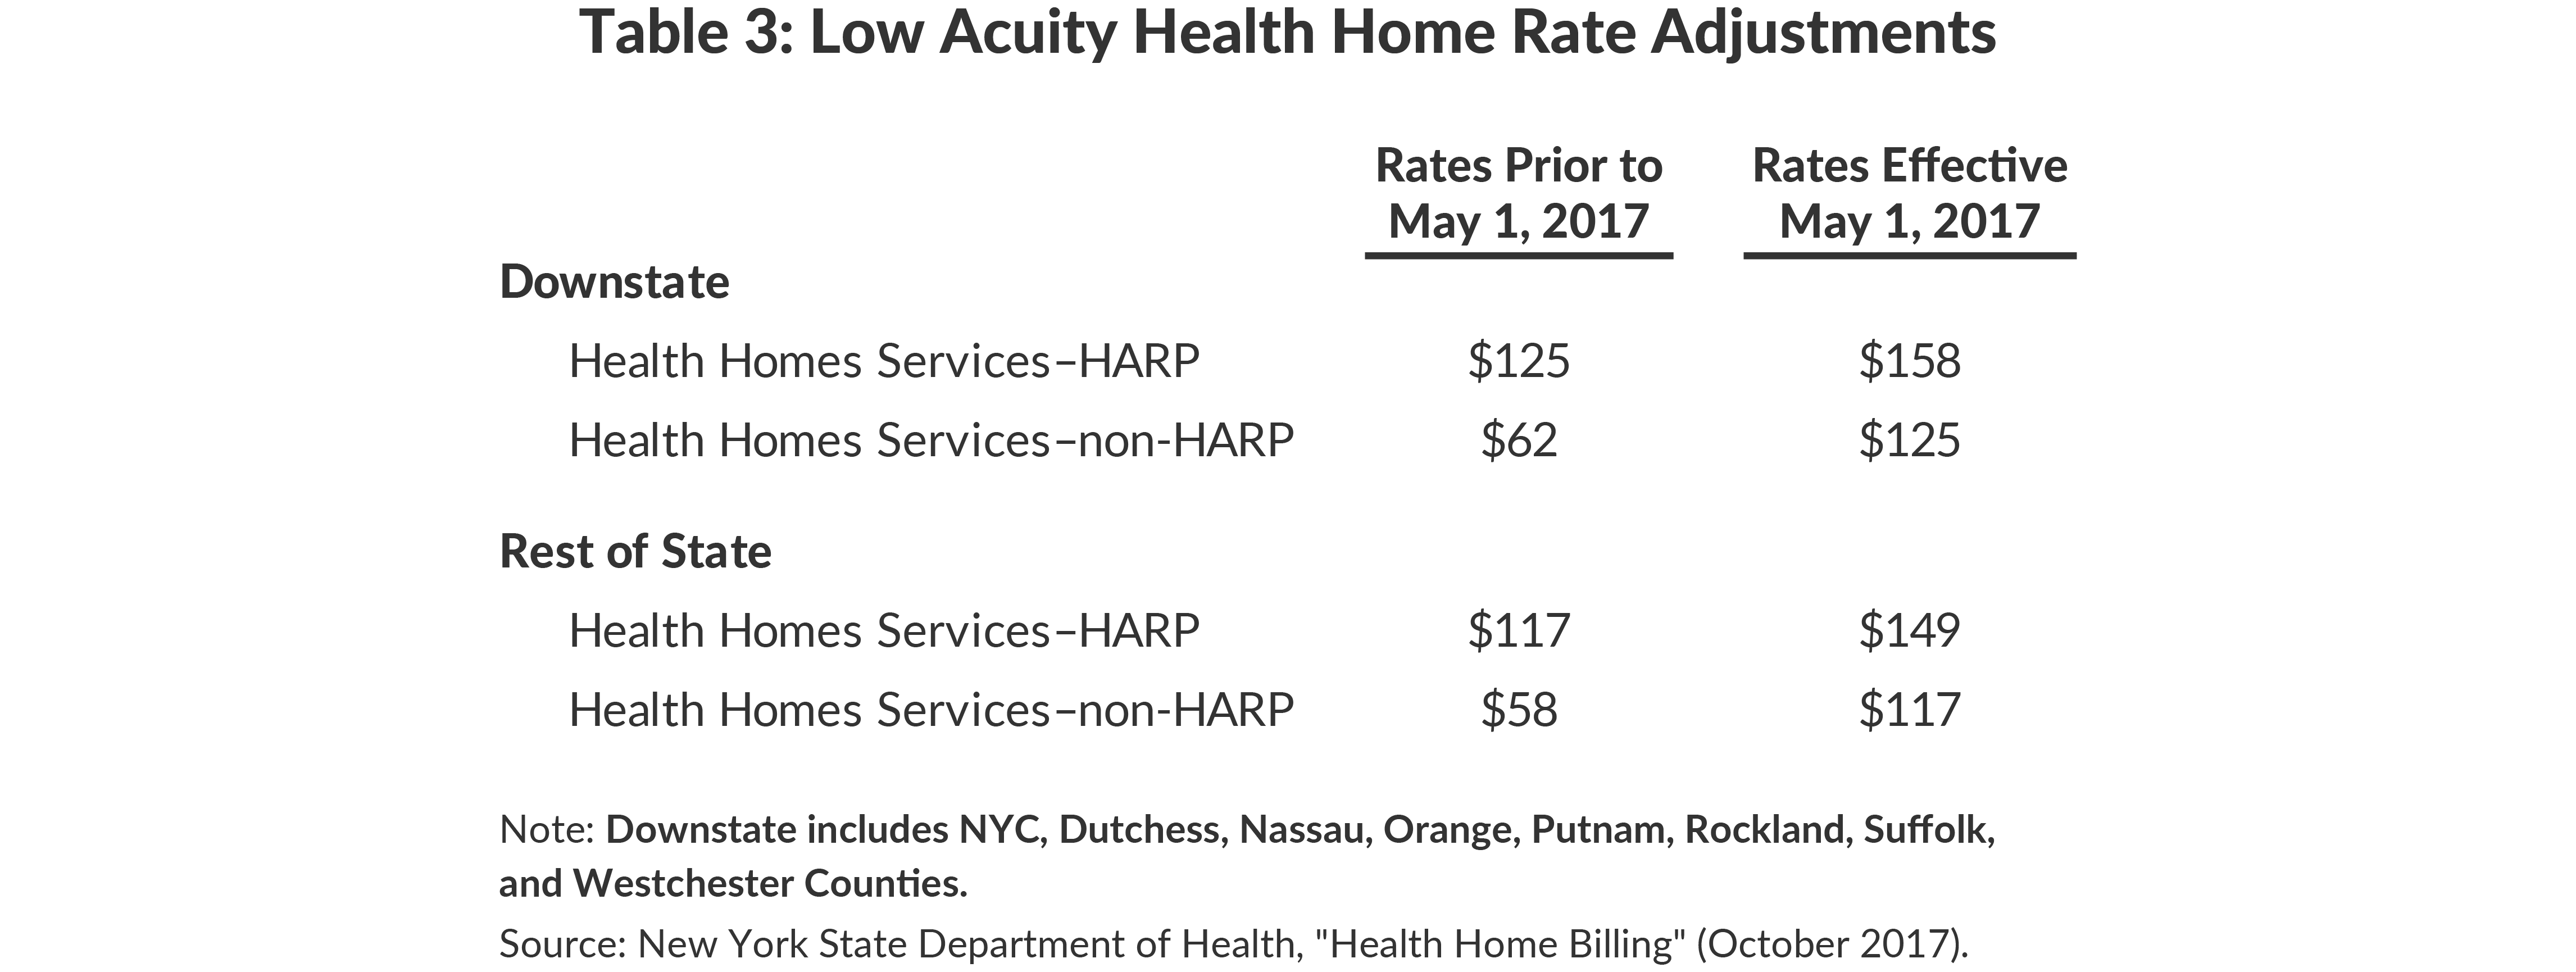 Table 3: Low Acuity Health Home Rate Adjustments